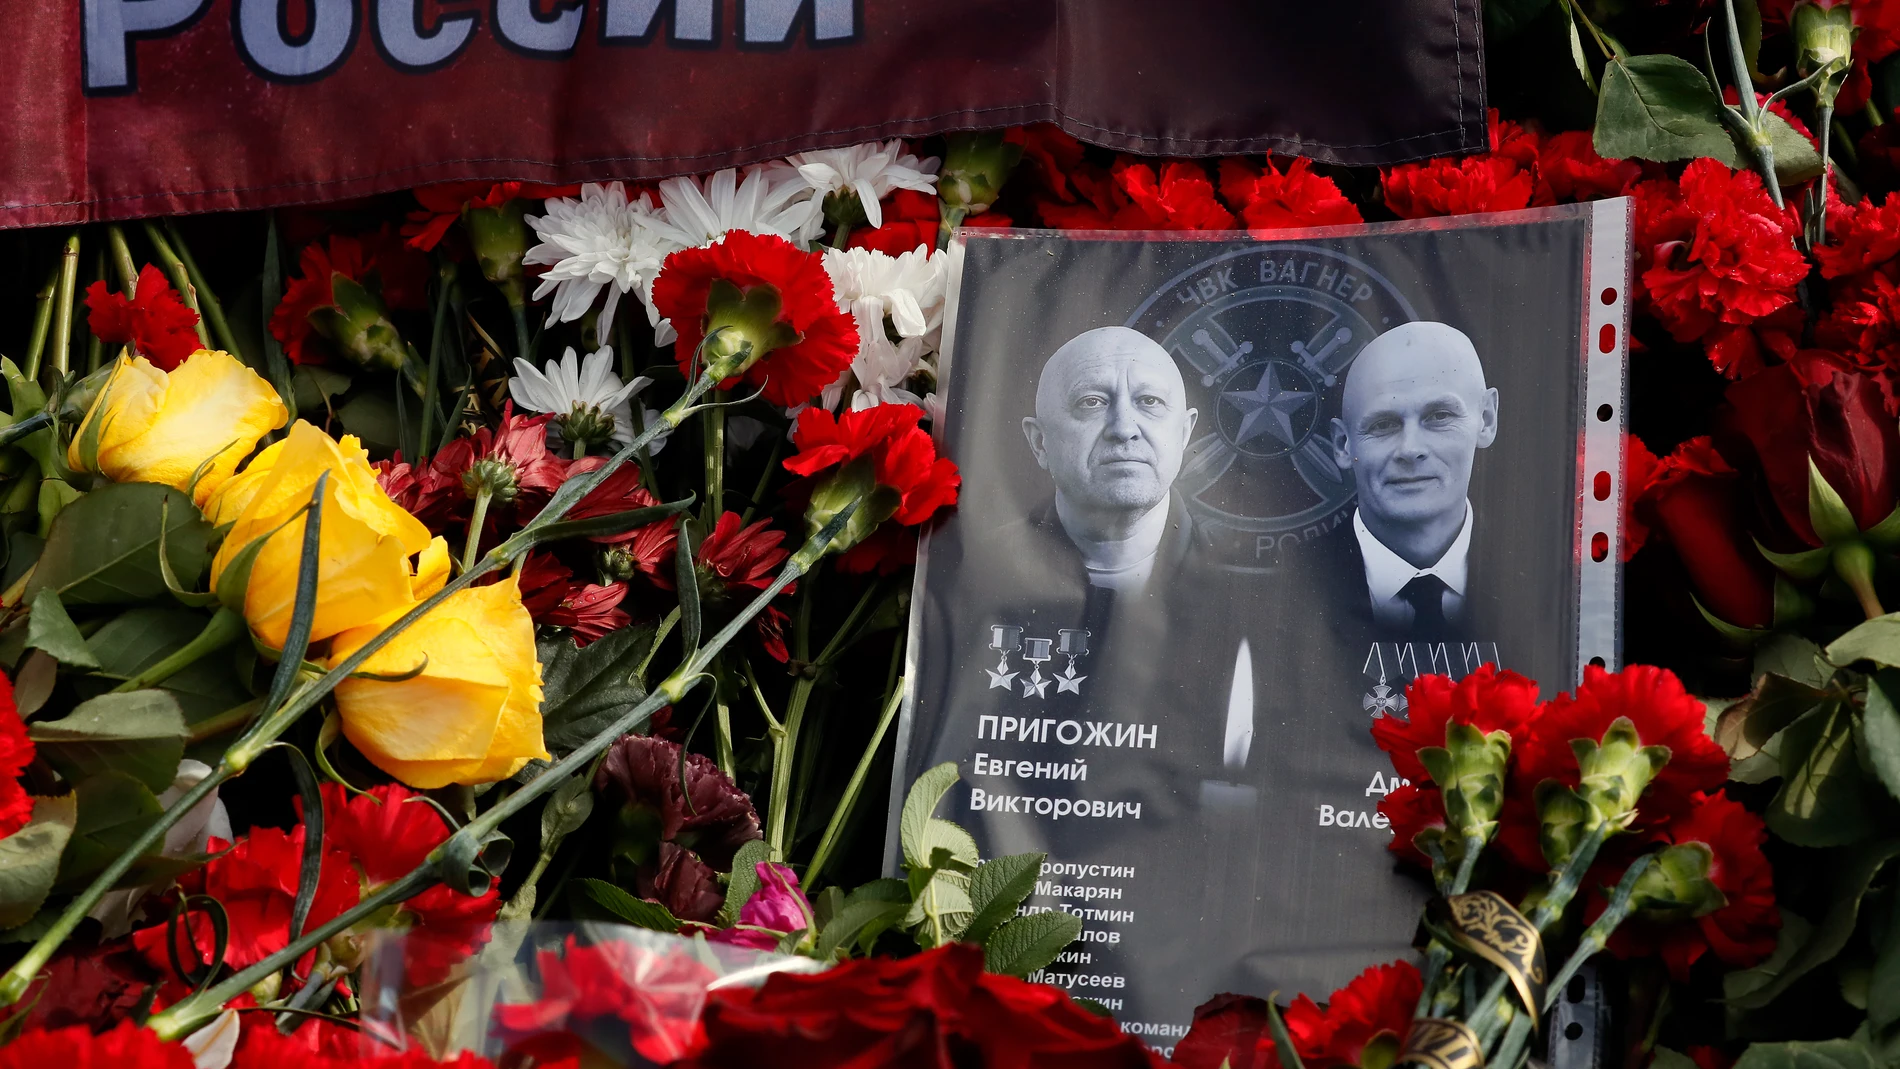 St. Petersburg (Russian Federation), 26/08/2023.- Portraits of the PMC Wagner leaders Yevgeny Prigozhin (L) and Dmitry Utkin are seen beside flowers at an informal memorial next to the former 'PMC Wagner Centre' in St. Petersburg, Russia, 26 August 2023. An investigation was launched into the crash of an aircraft in the Tver region in Russia on 23 August 2023, the Russian Federal Air Transport Agency said in a statement. Among the passengers was Wagner chief Yevgeny Prigozhin, the agency repo...